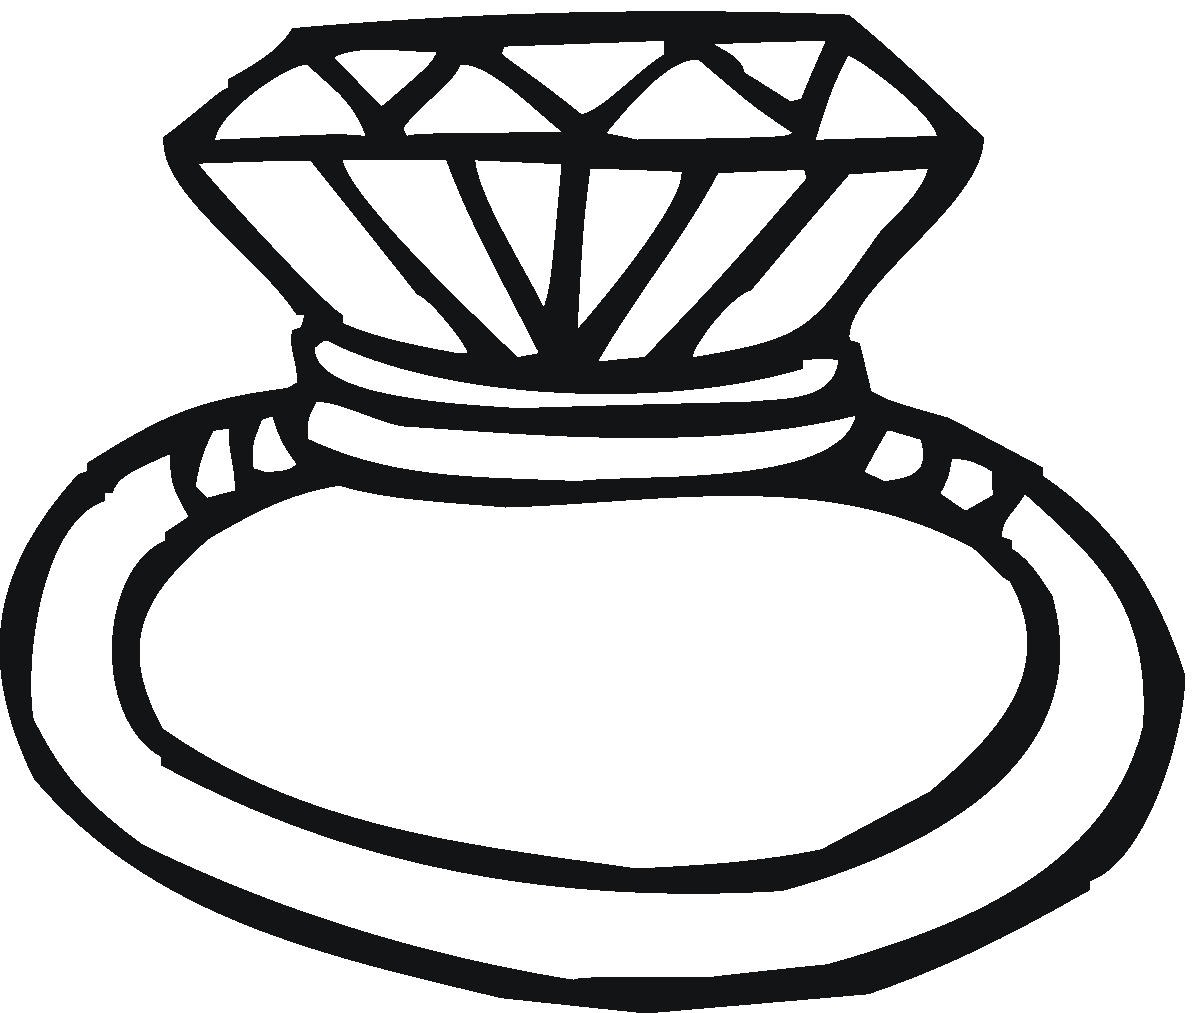 Free black and white wedding rings clipart